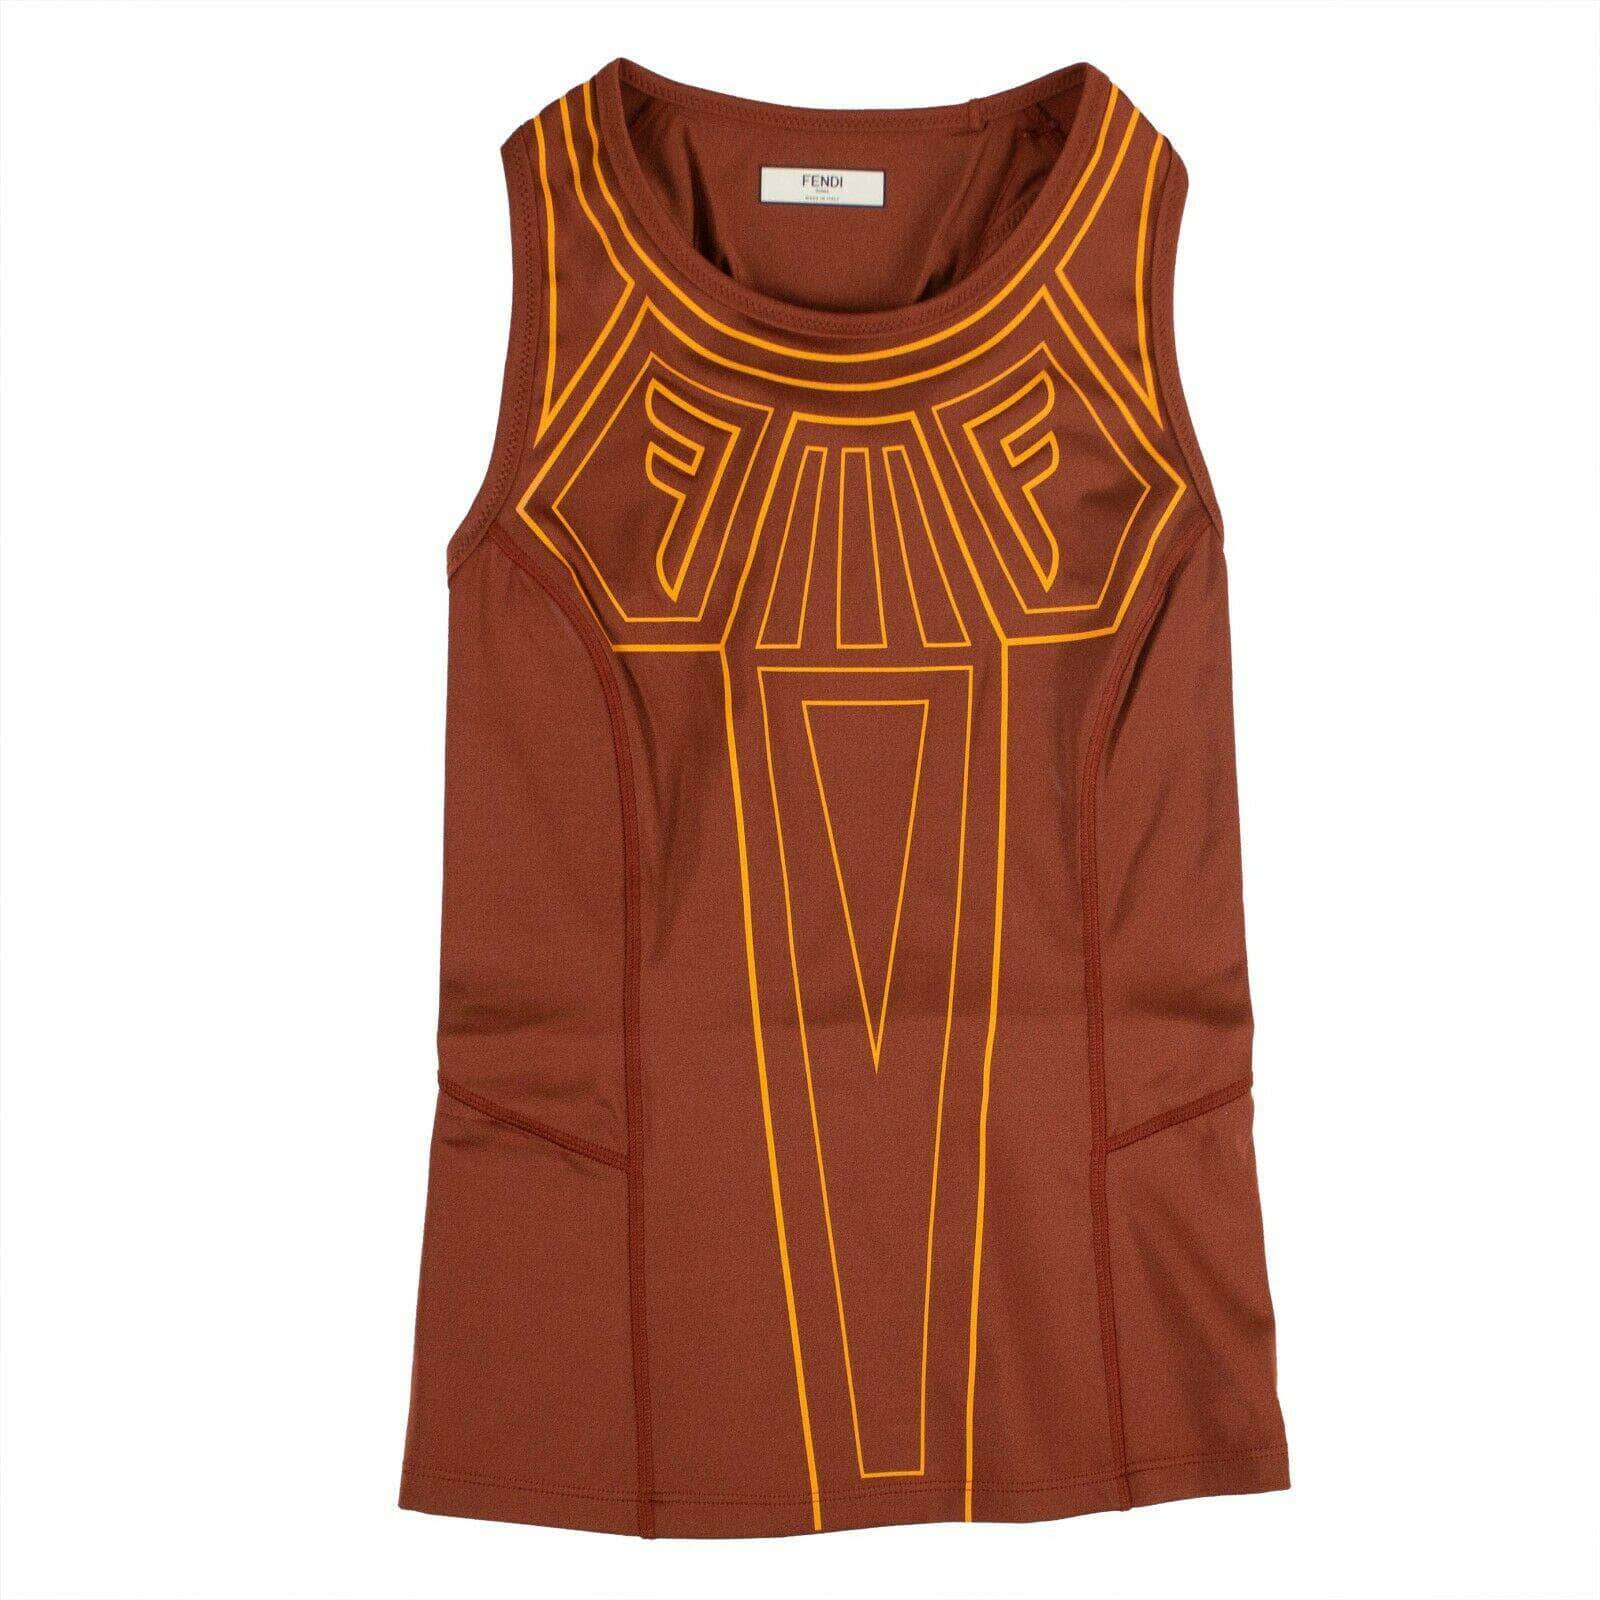 Fendi 500-750, couponcollection, fendi, gender-womens, main-clothing, size-0-38, tank top, womens-tank-tops 0 / 38 Graphic Logo Tank Top - Orange 75LE-1632/38 75LE-1632/38